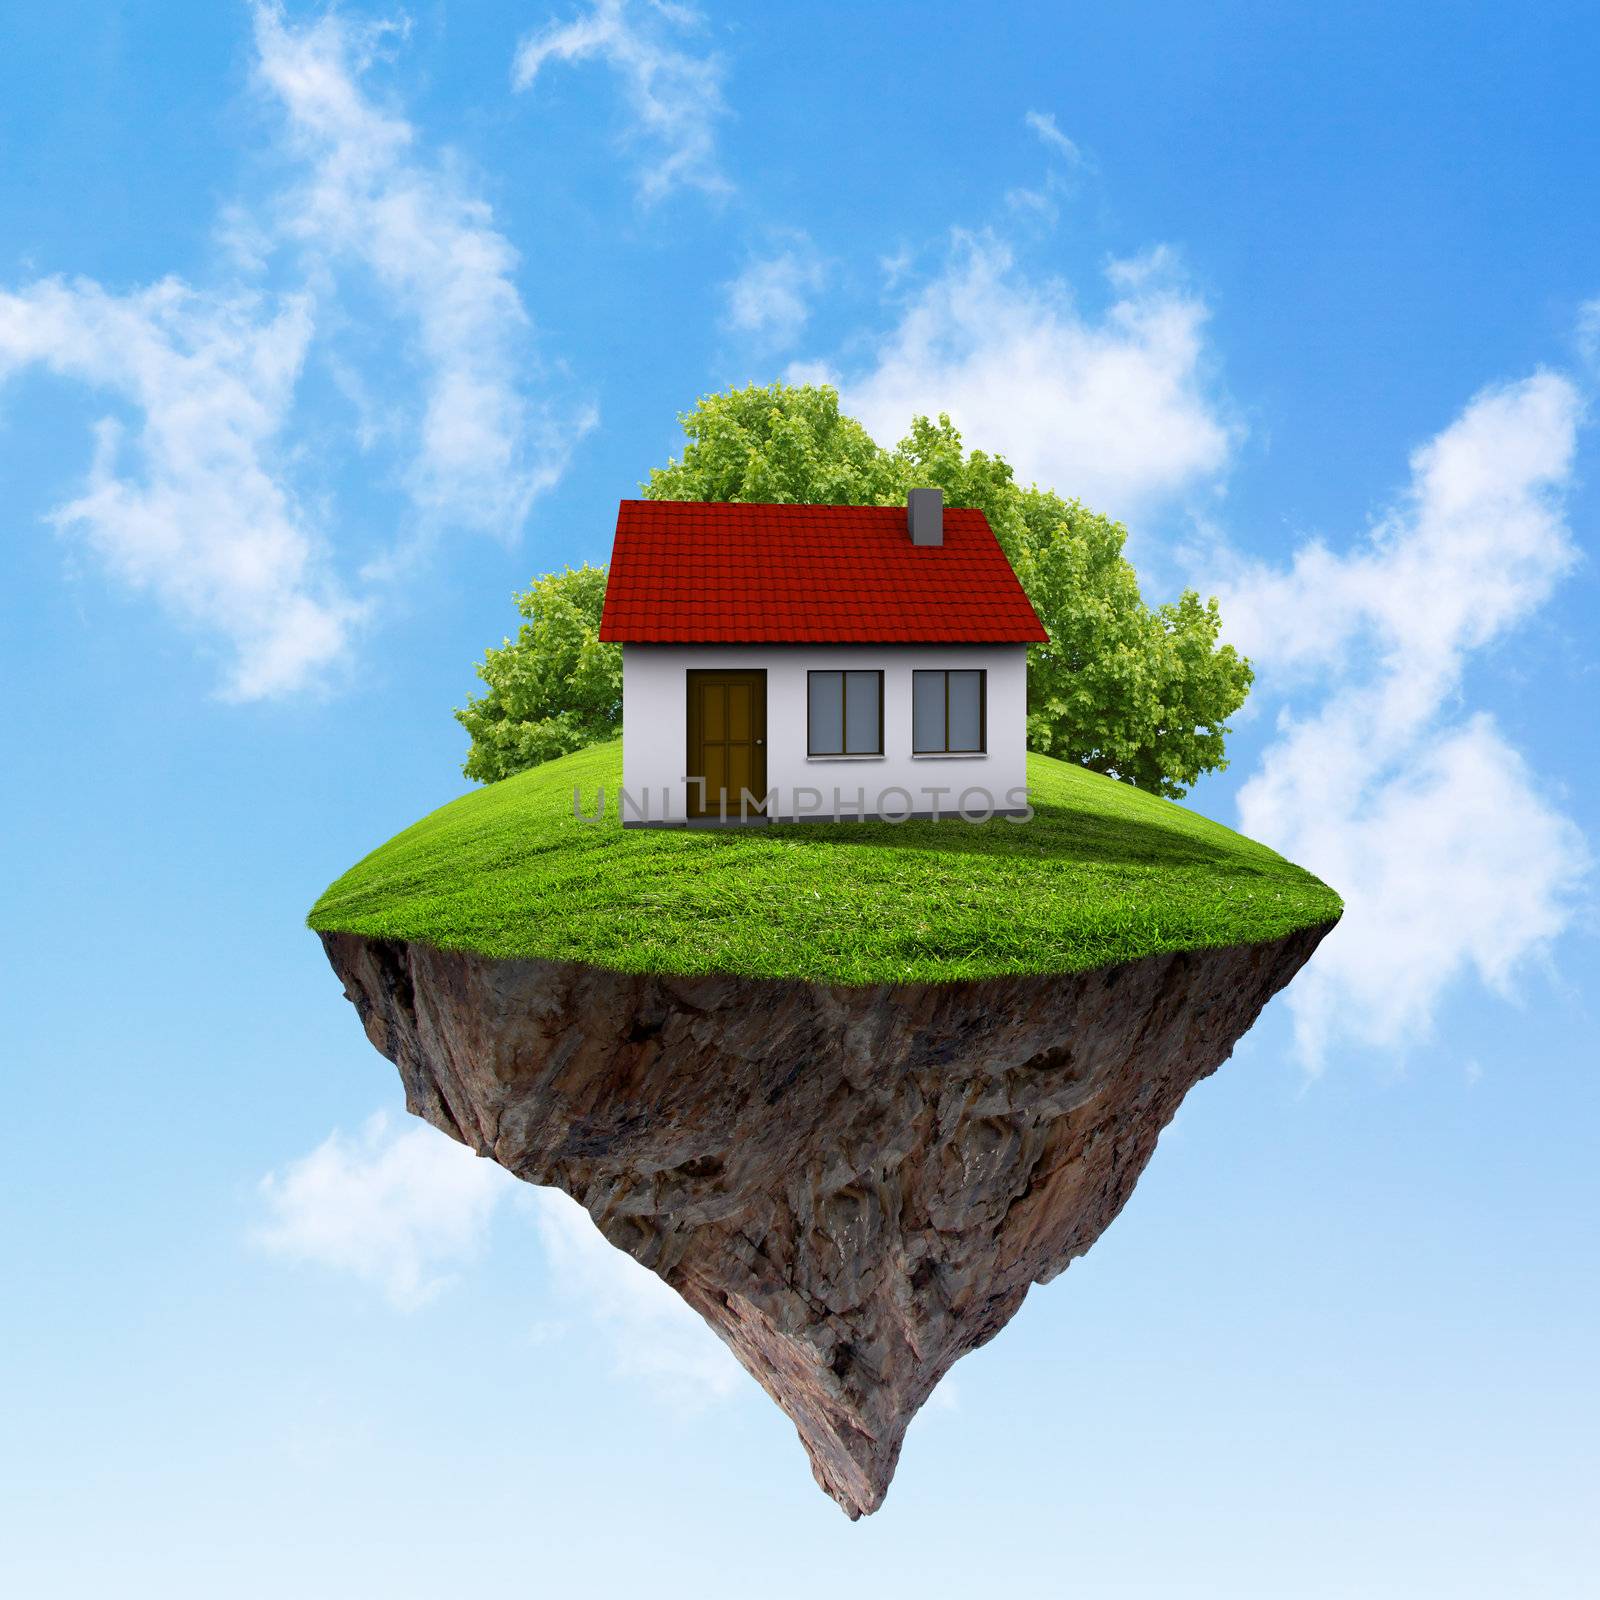 A piece of land in the air with house and tree. by sergey_nivens